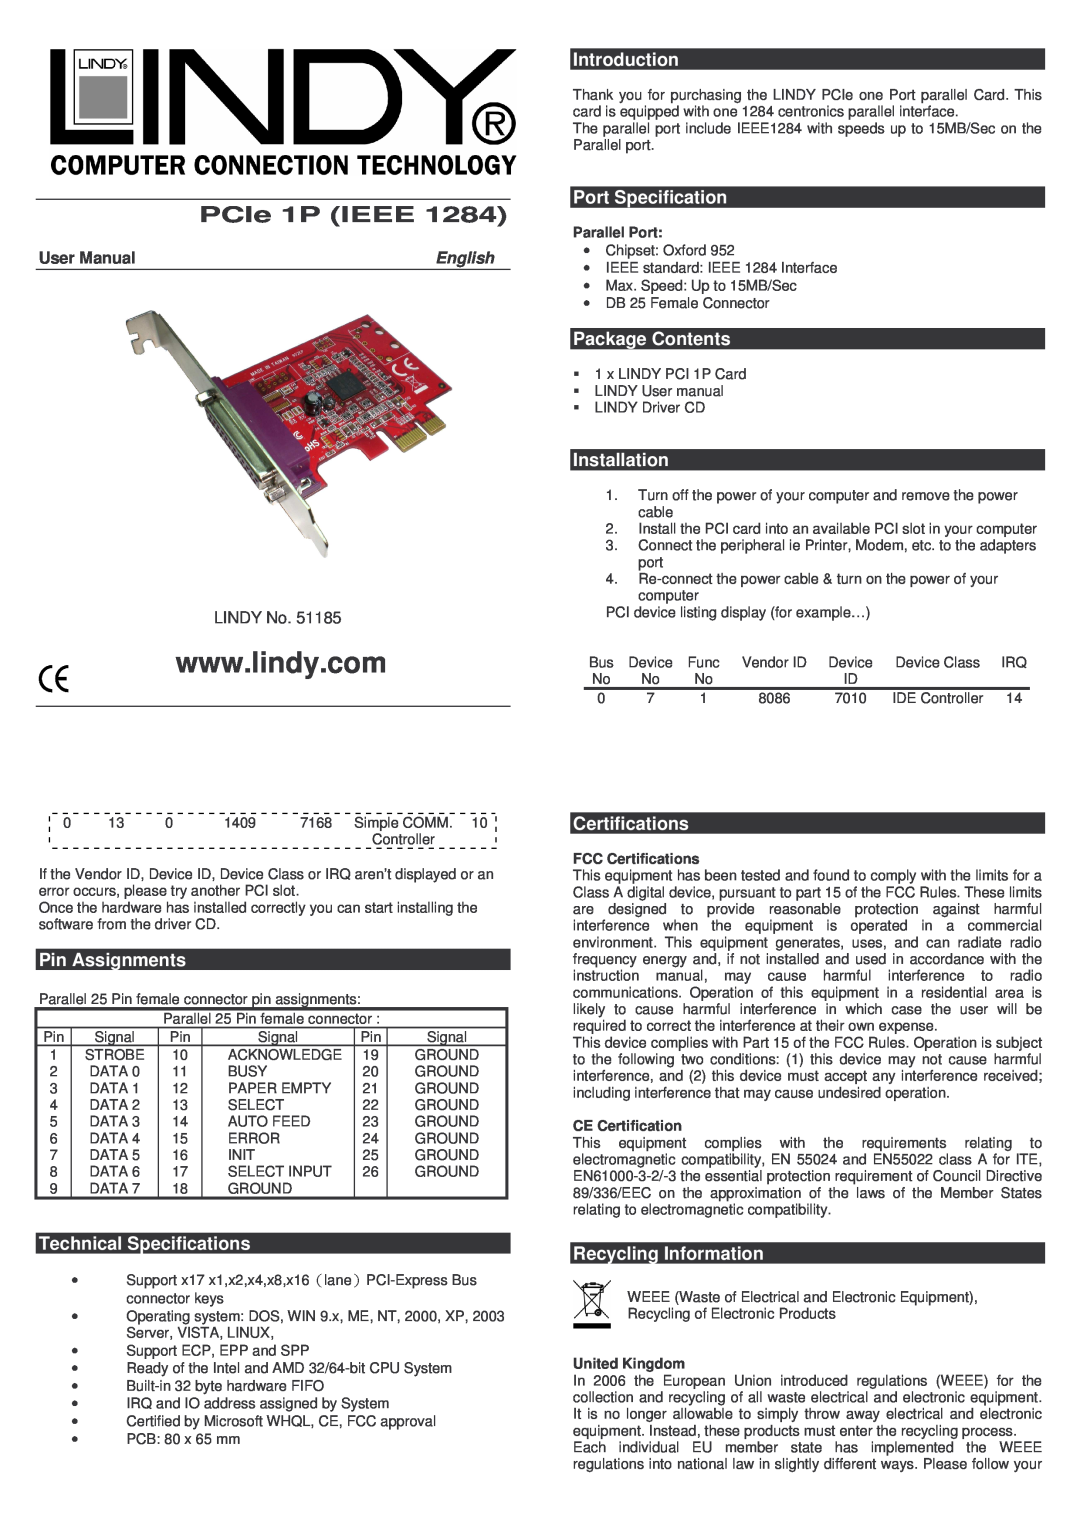 Lindy 51185 technical specifications Parallel Port, FCC Certifications, CE Certification, United Kingdom, PCIe 1P IEEE 